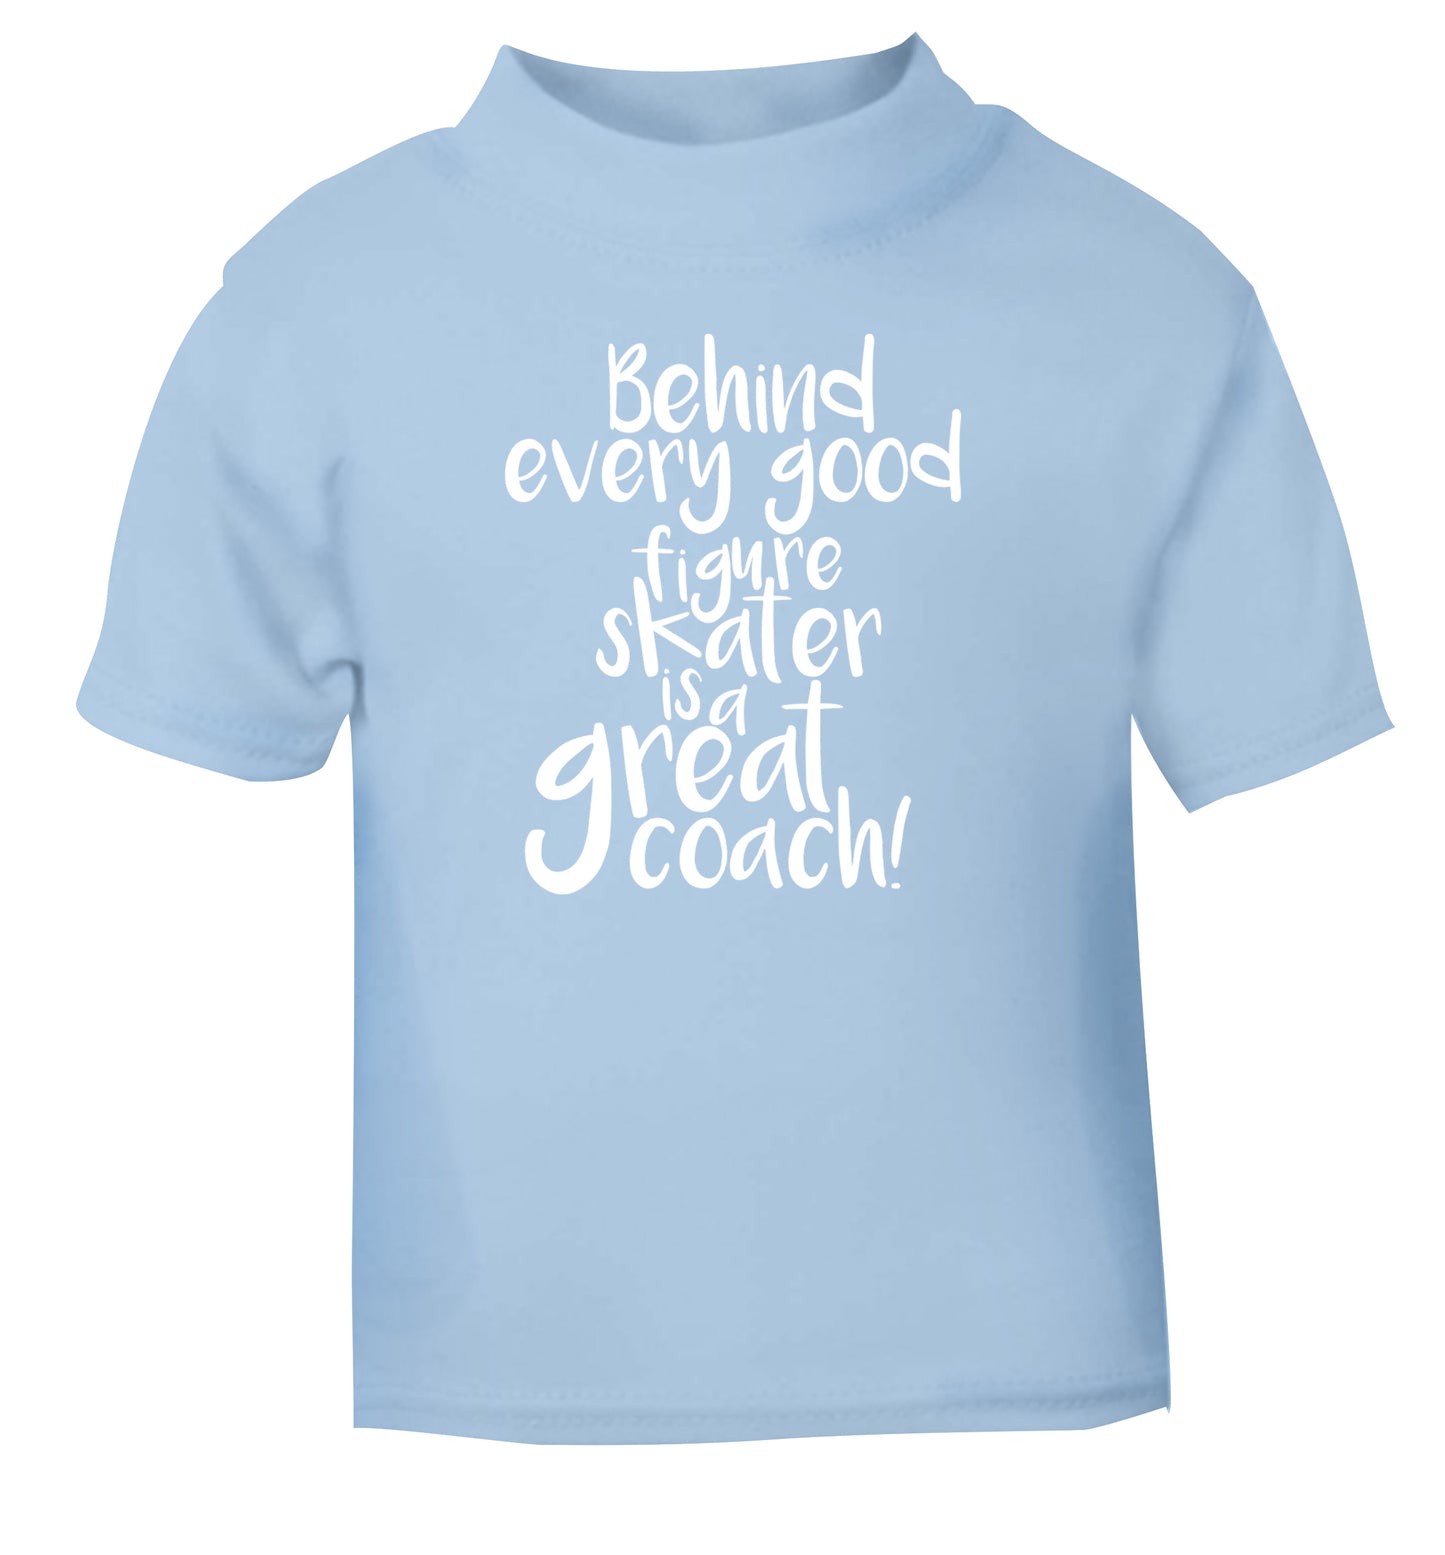 Behind every good figure skater is a great coach light blue Baby Toddler Tshirt 2 Years